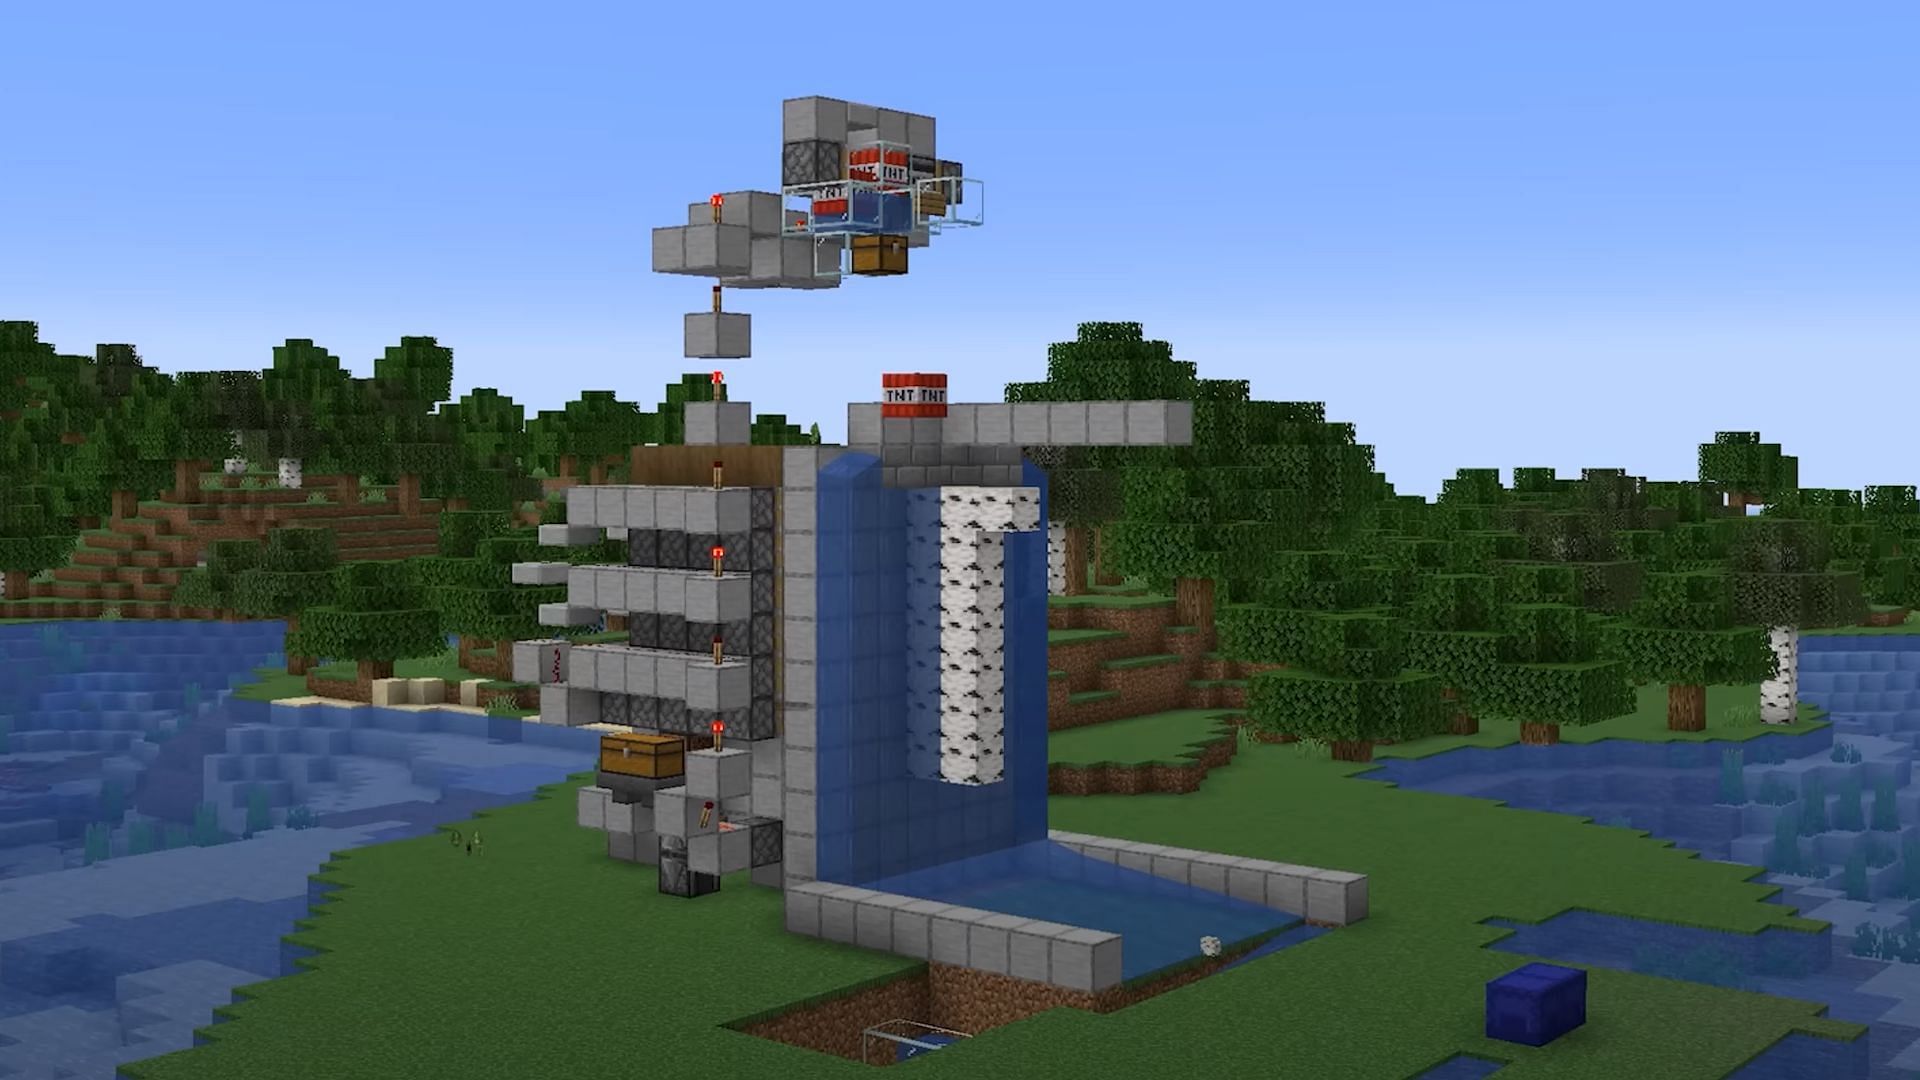 TNT farms should finally be coming to Bedrock (Image via Shulkercraft/YouTube)